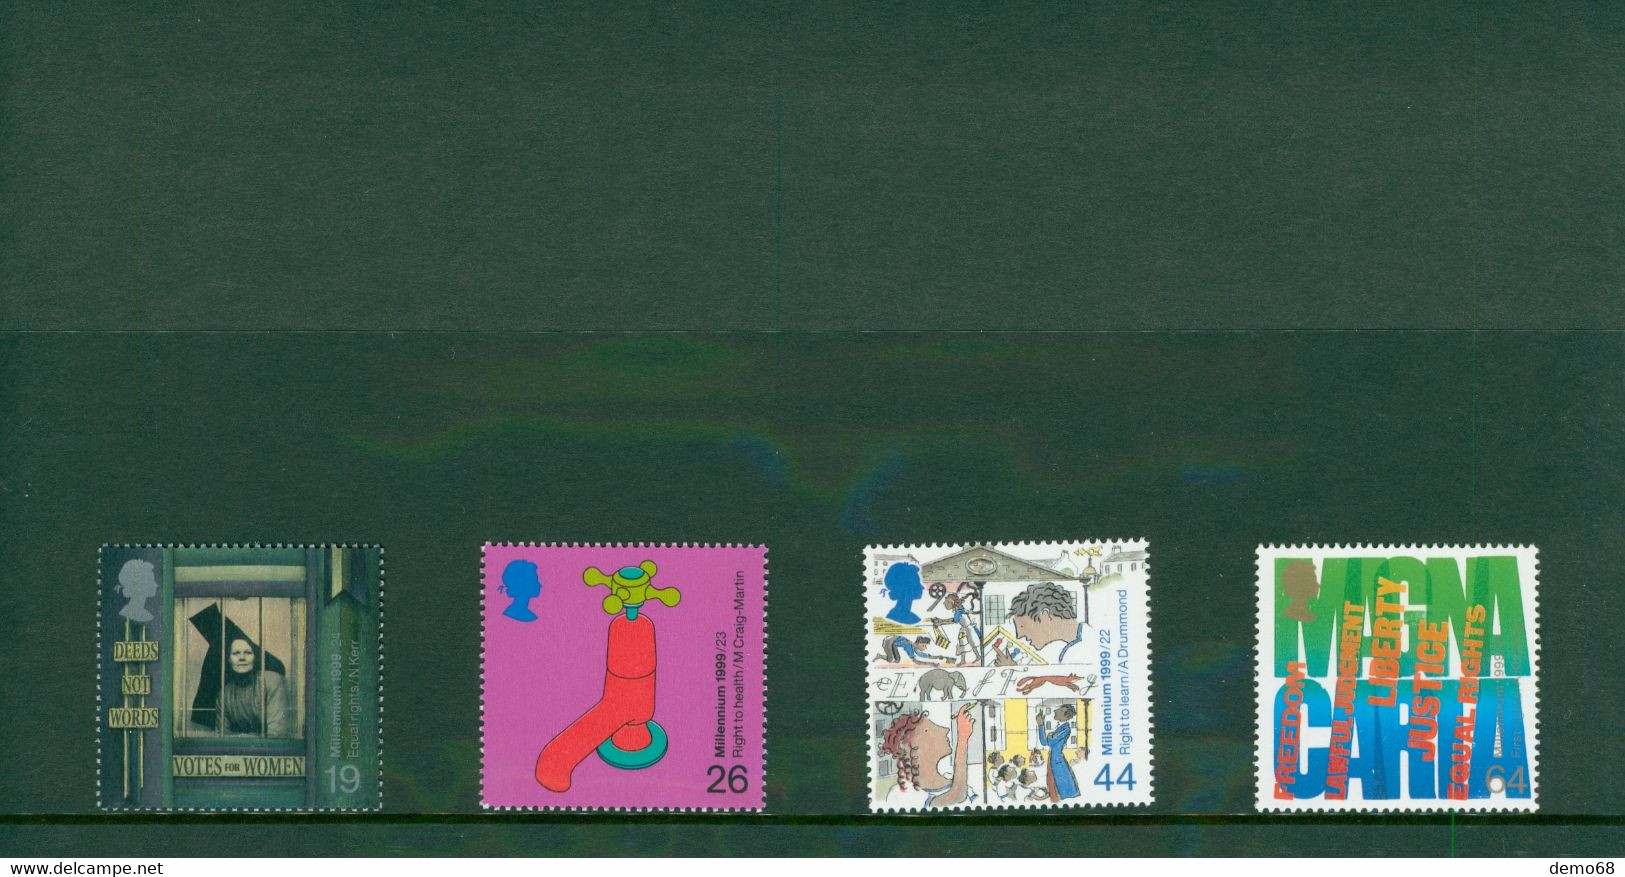 Stamp Timbre England Great Britain British Citizens' Tale Not Vote NoVoceFeuillet Neuf 4 Timbre S Royal Mail Mint Stamps - Colecciones Completas